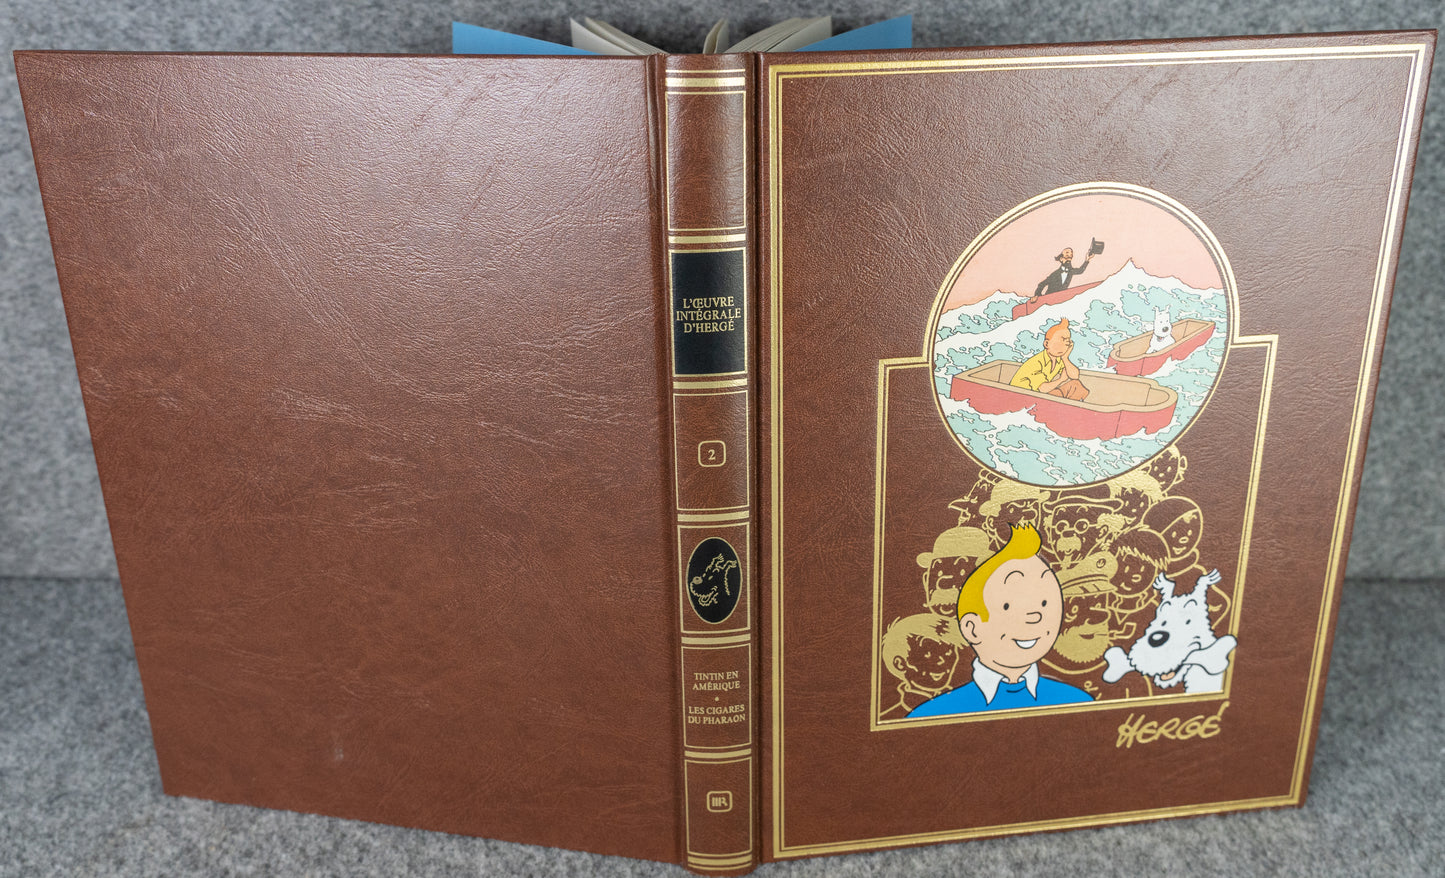 Rombaldi Tintin Volume 2 - Tintin in America, Cigars of the Pharaoh + other works - 1st Edition 1985 Herge EO